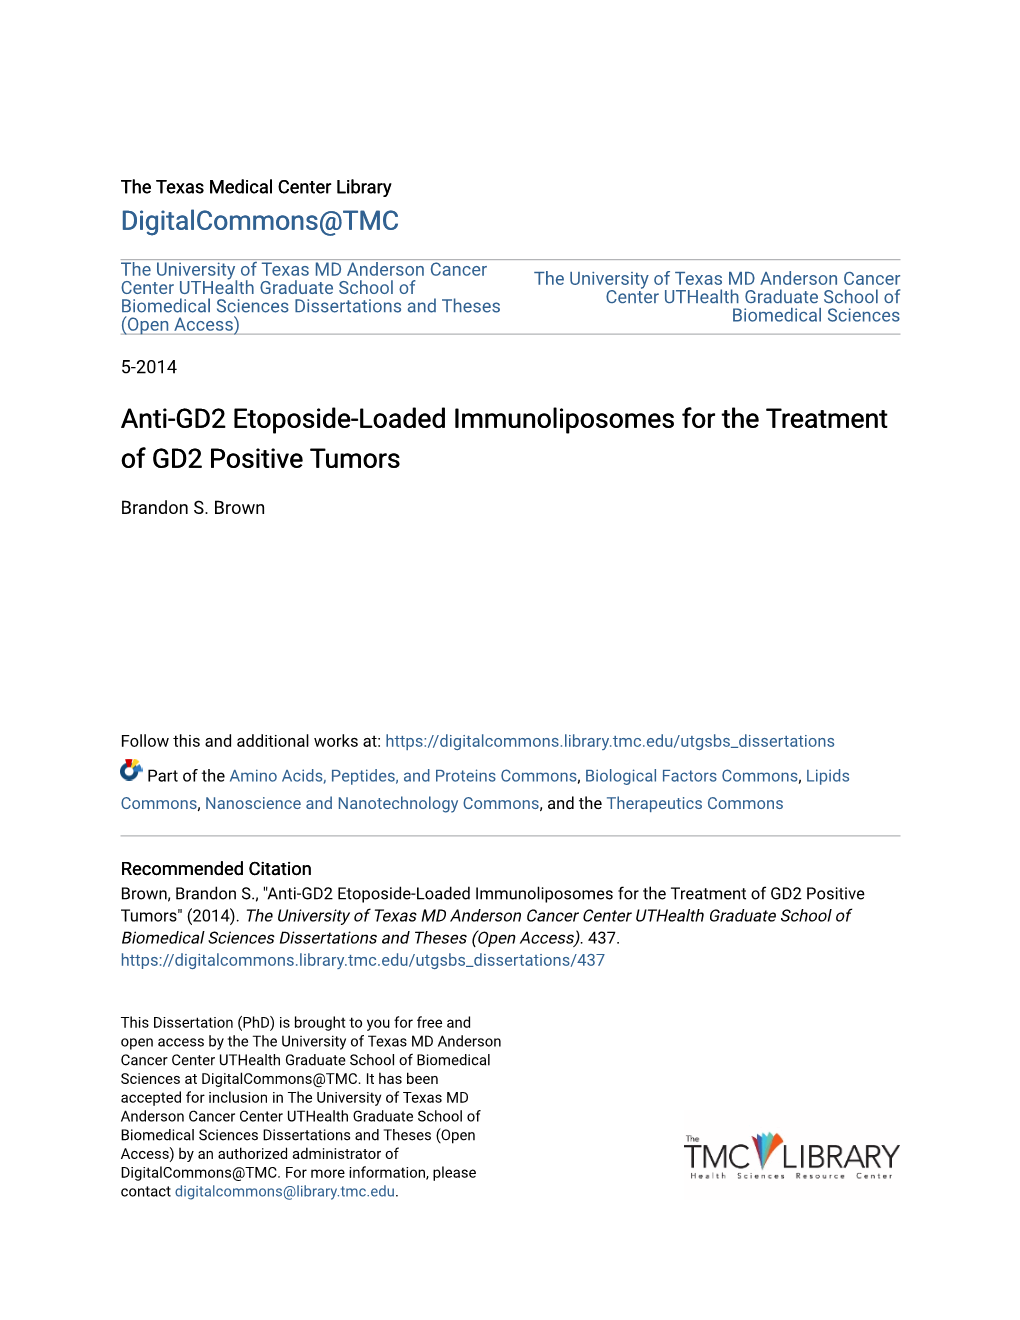 Anti-GD2 Etoposide-Loaded Immunoliposomes for the Treatment of GD2 Positive Tumors